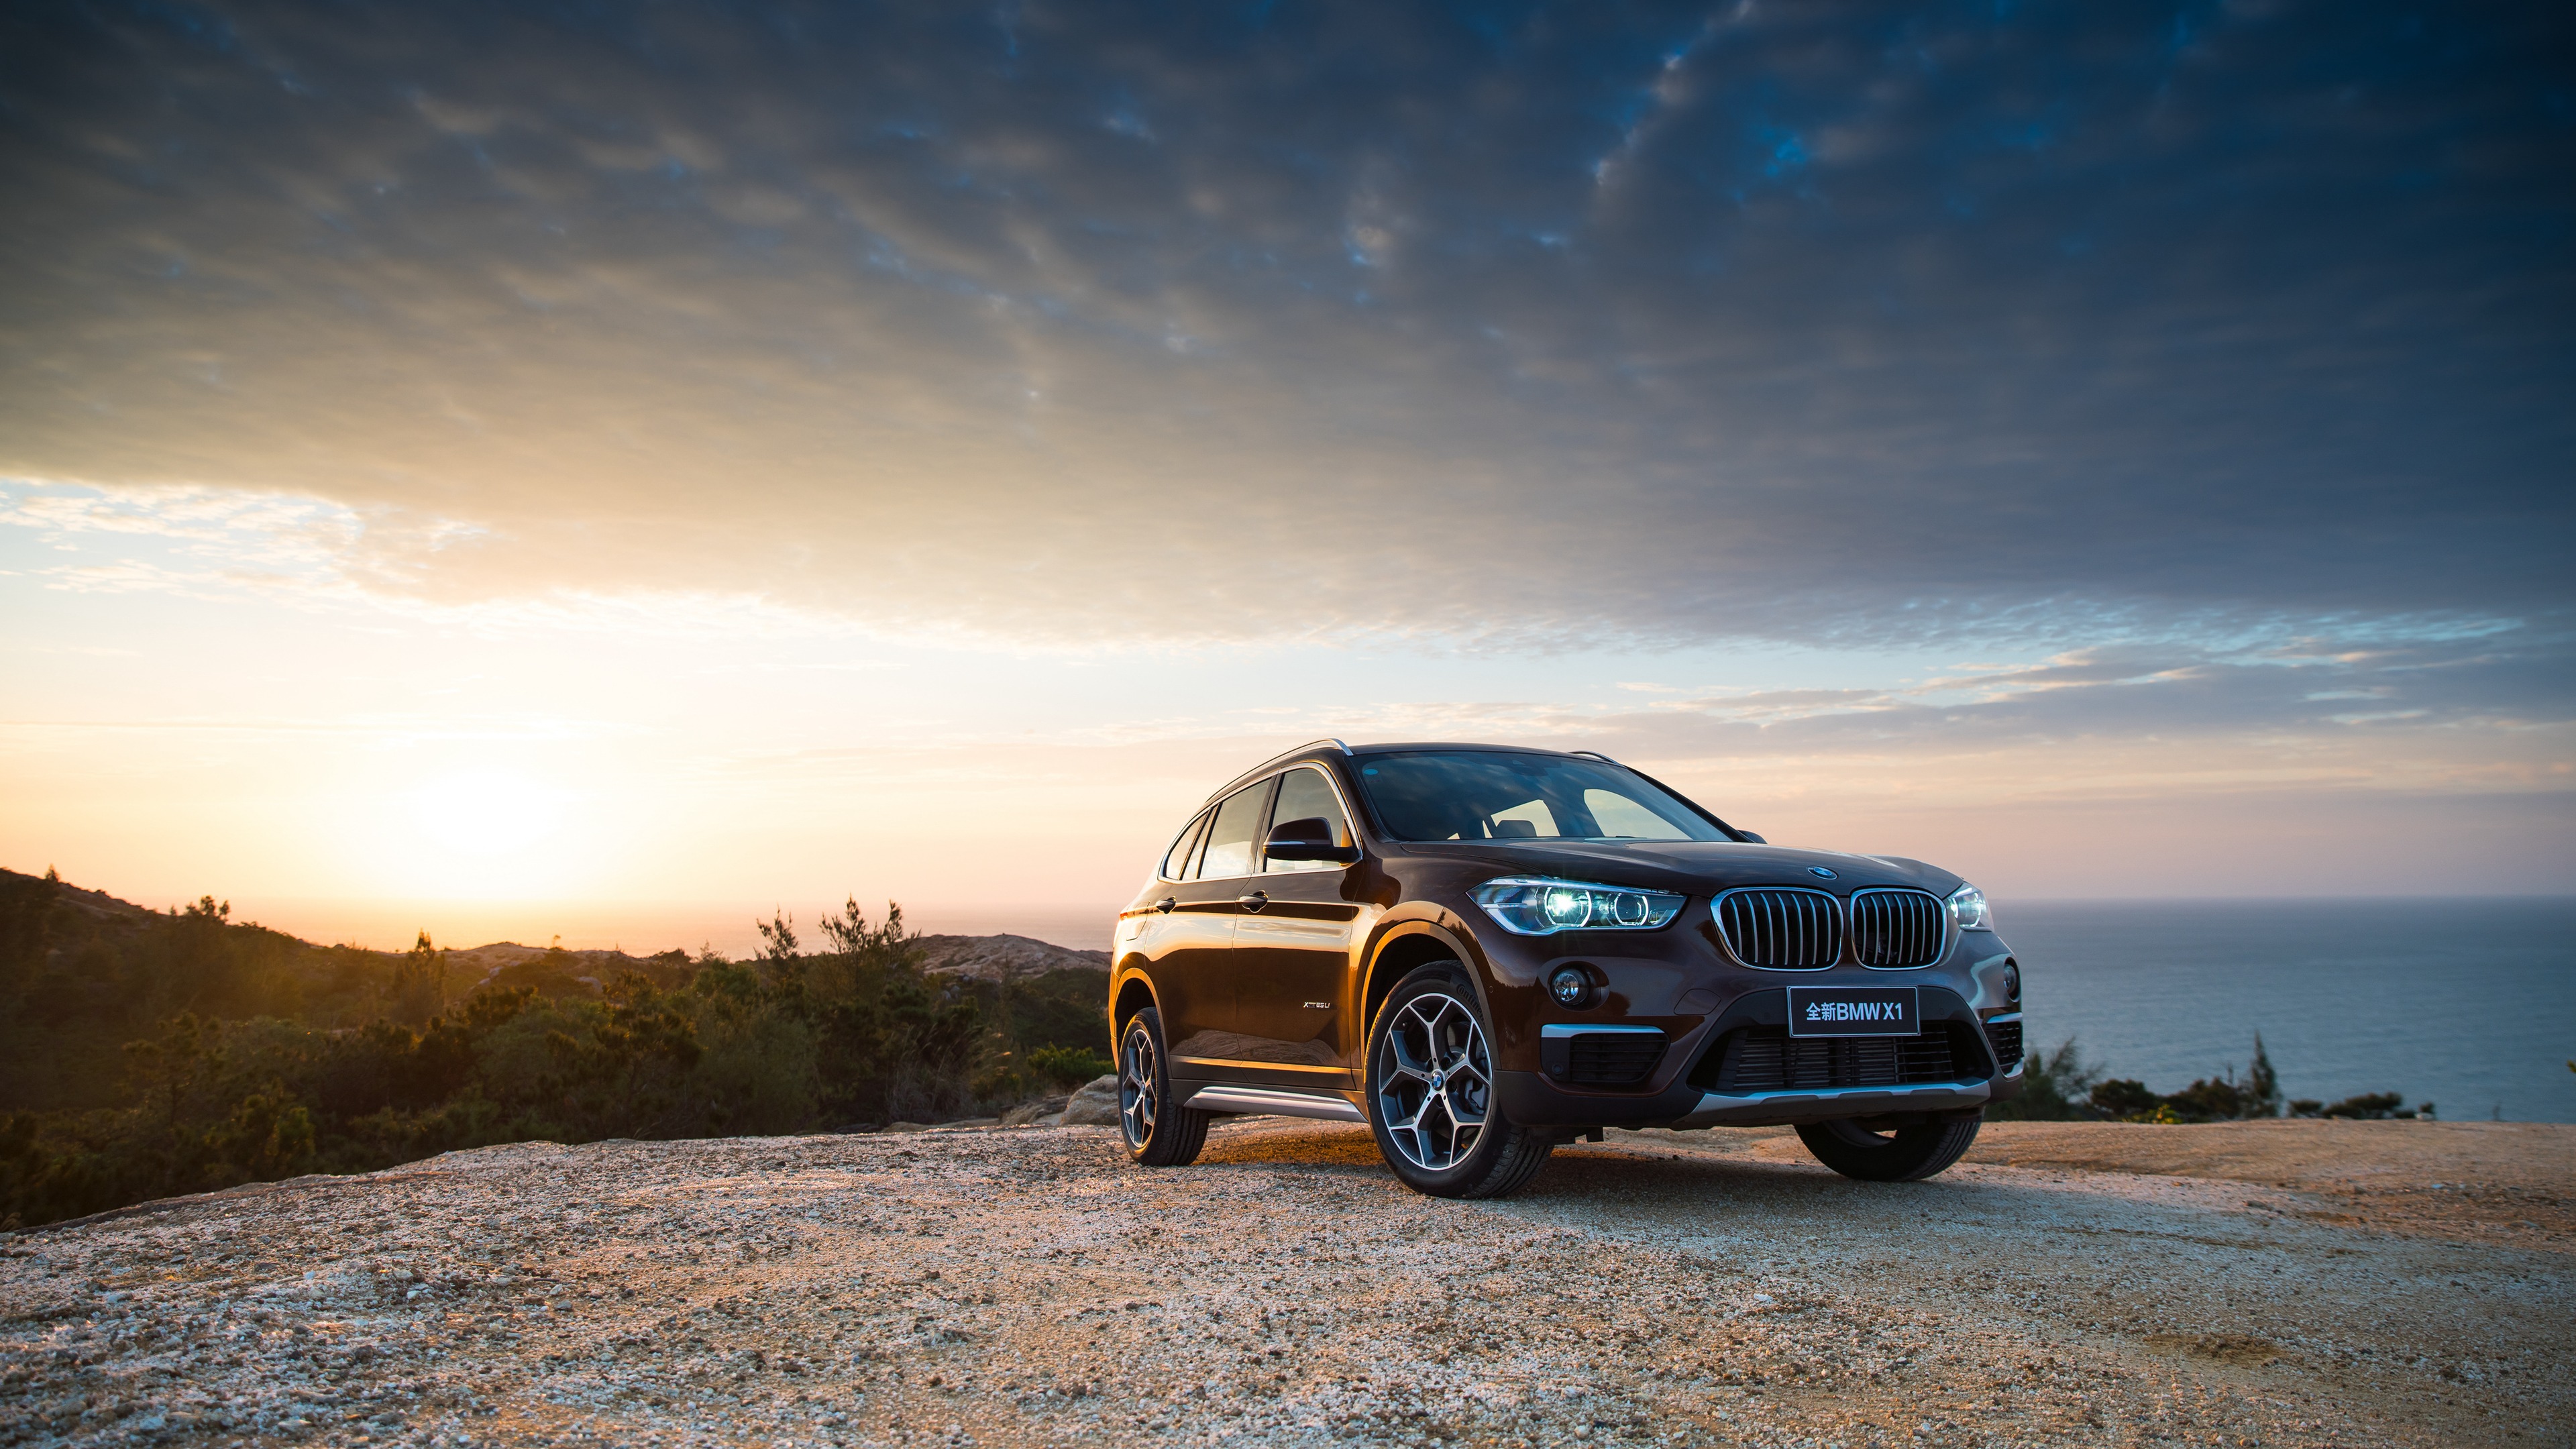 Download wallpaper 3840x2160 bmw, x f side view, crossover 4k